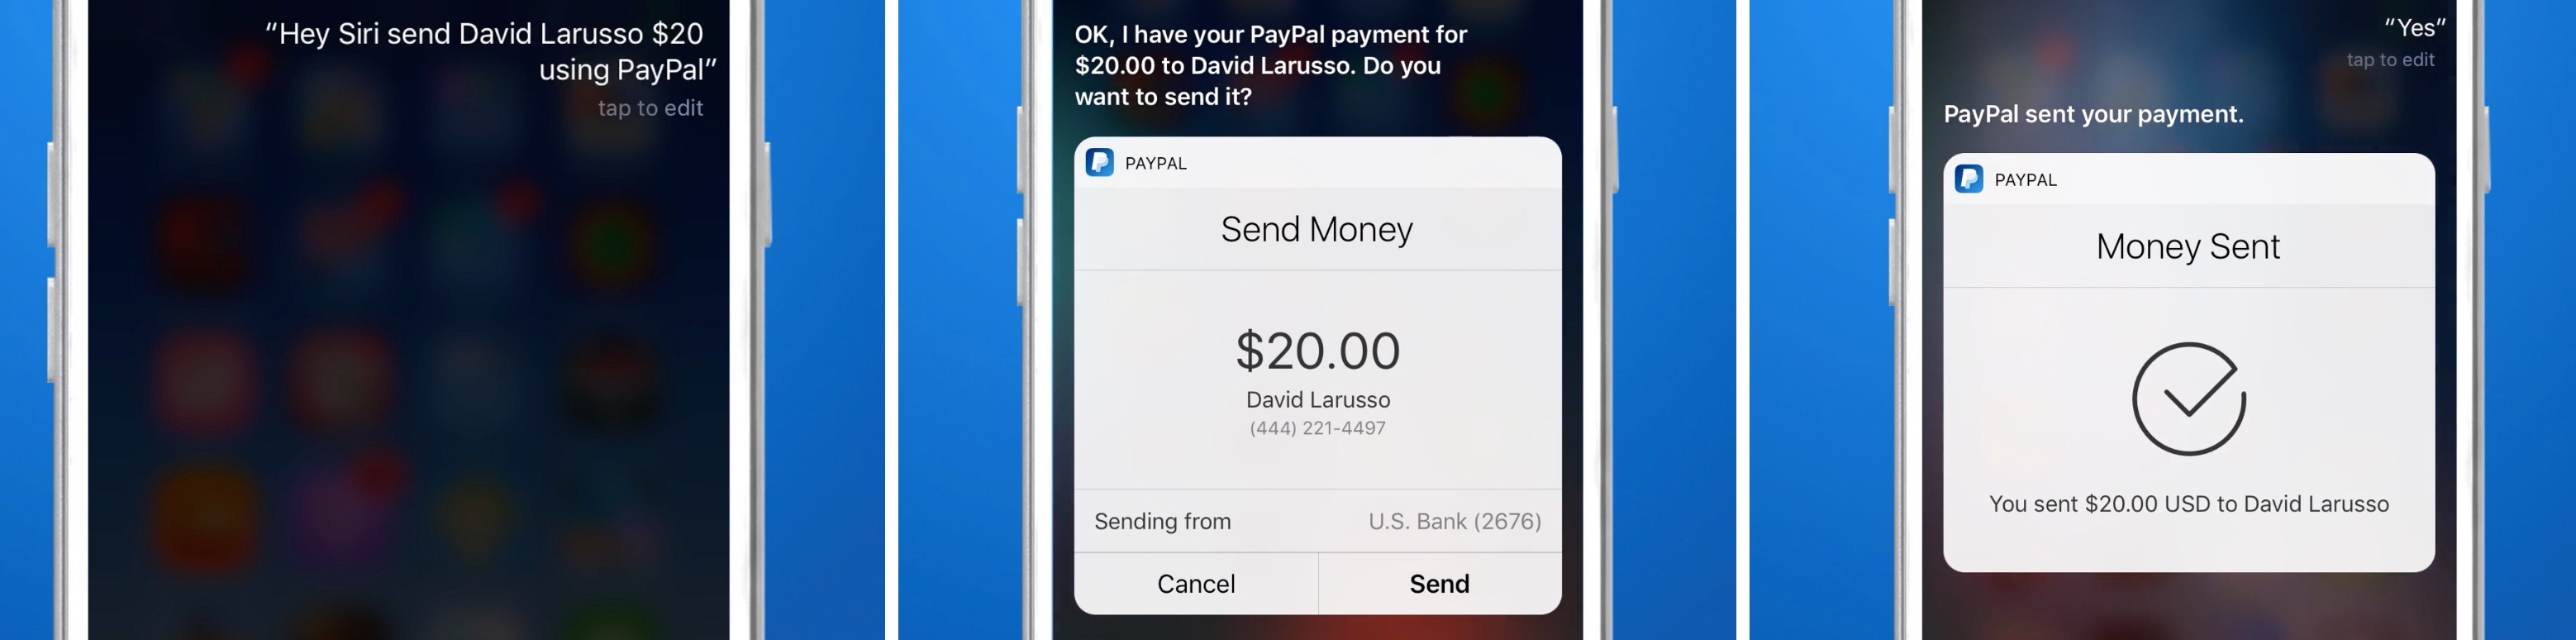 PayPal for iOS Siri payment integration